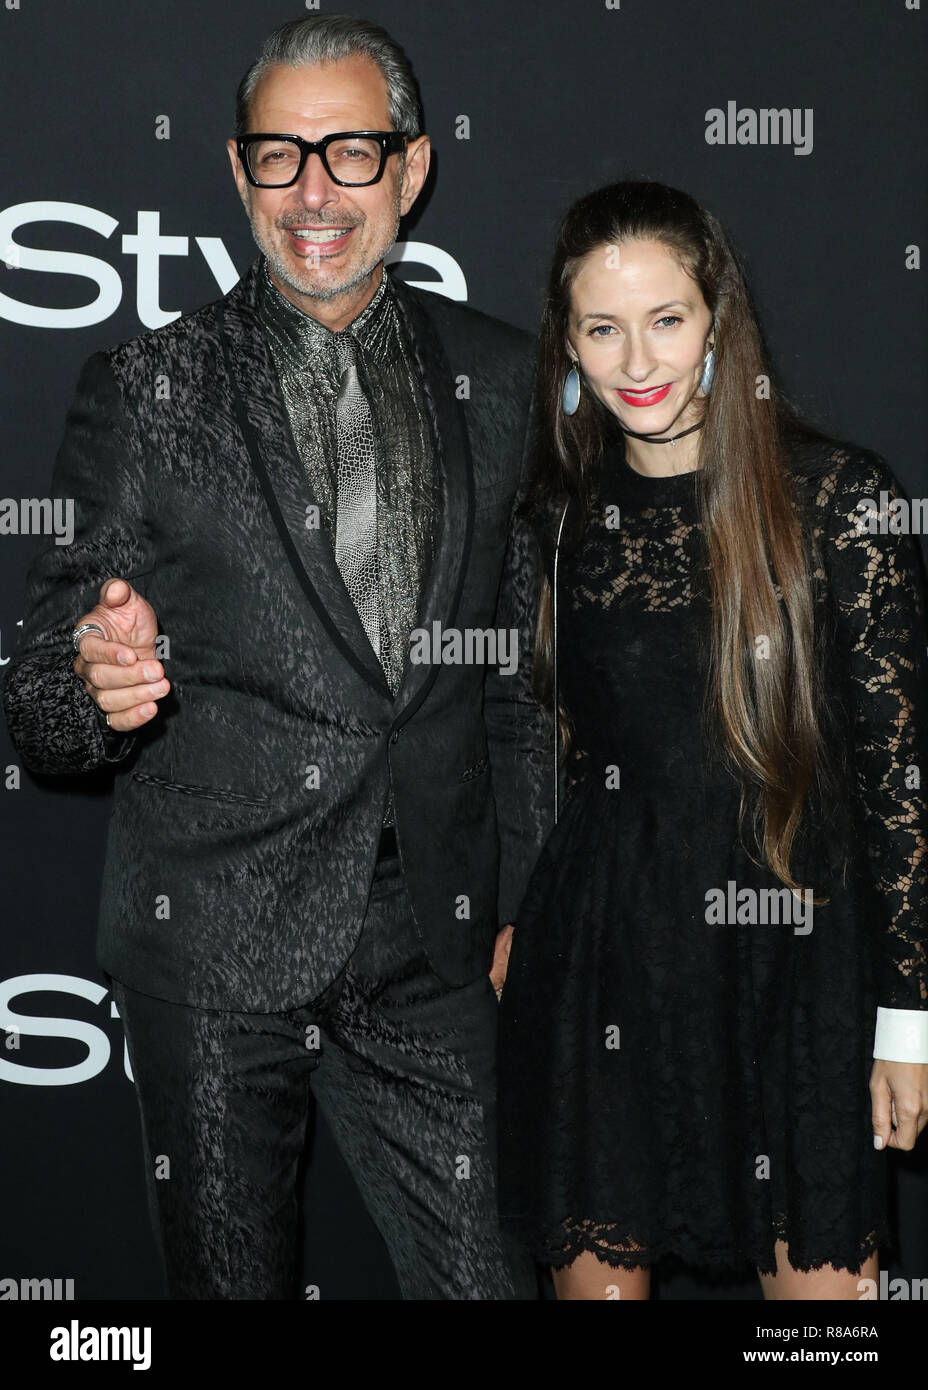 LOS ANGELES, CA, USA - OCTOBER 22: Jeff Goldblum, Emilie Livingston at the InStyle Awards 2018 held at the Getty Center on October 22, 2018 in Los Angeles, California, United States. (Photo by Xavier Collin/Image Press Agency) Stock Photo